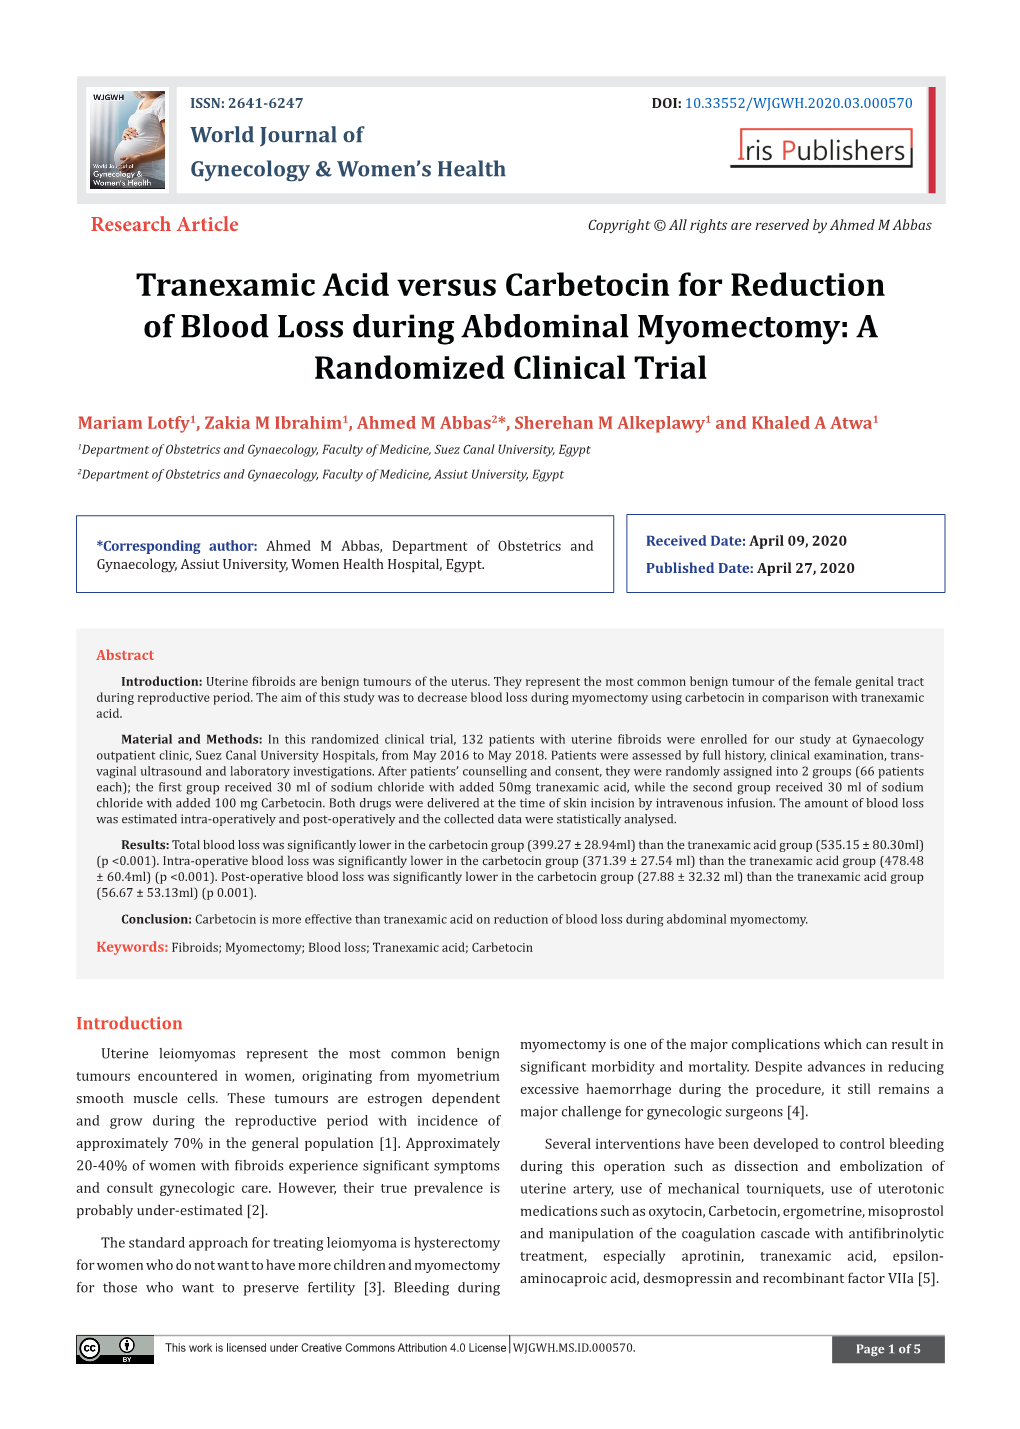 Tranexamic Acid Versus Carbetocin for Reduction of Blood Loss During Abdominal Myomectomy: a Randomized Clinical Trial